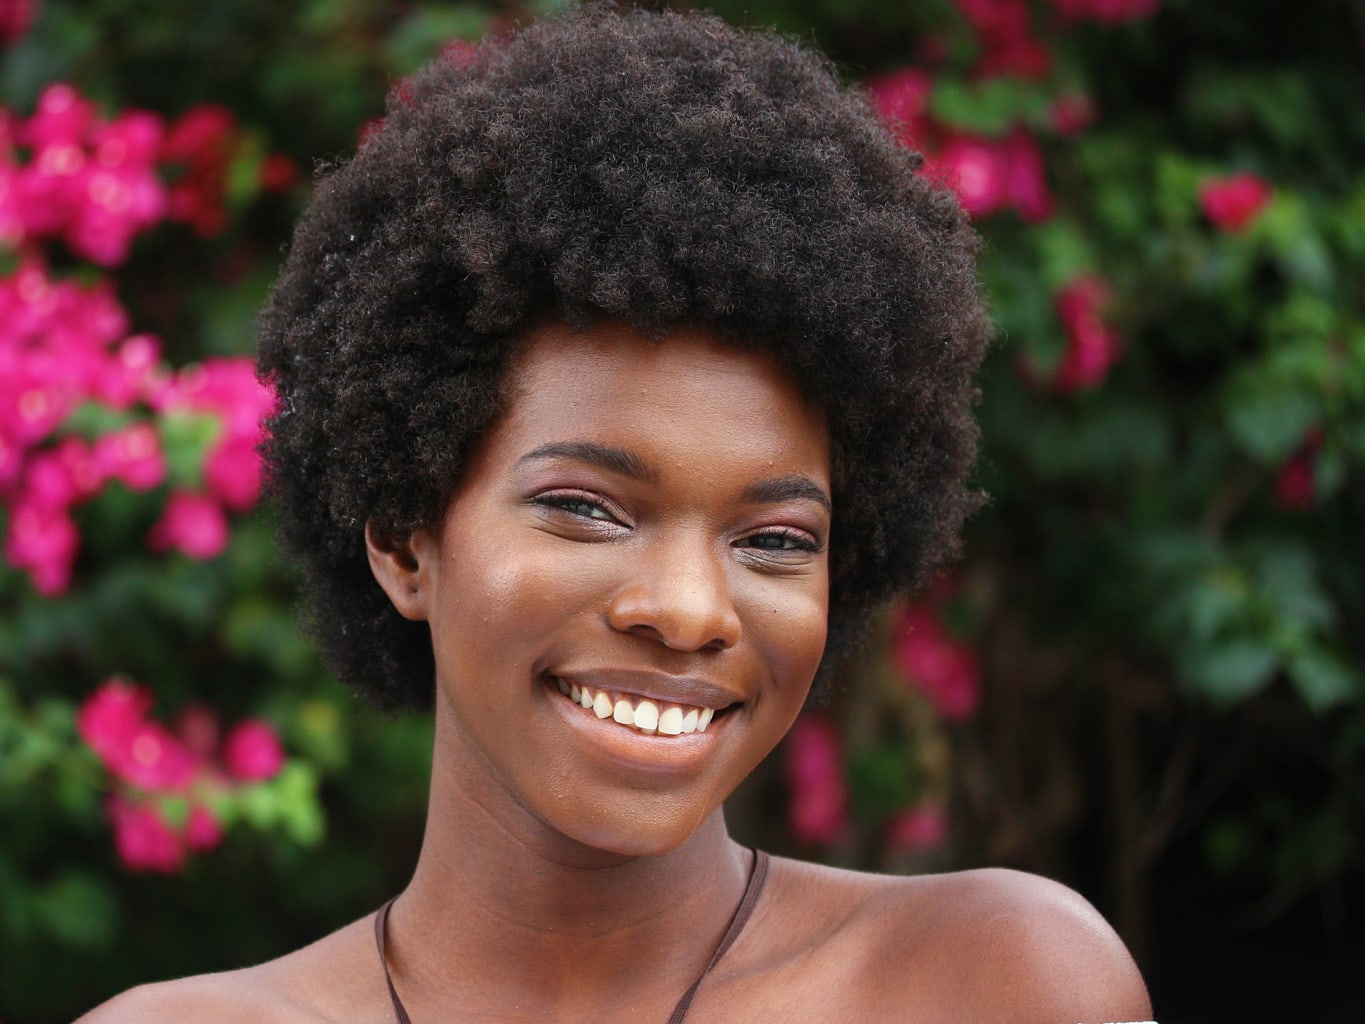 Uchoku's curly natural hair is beautiful. She wears it with a fresh face of minimal makeup.